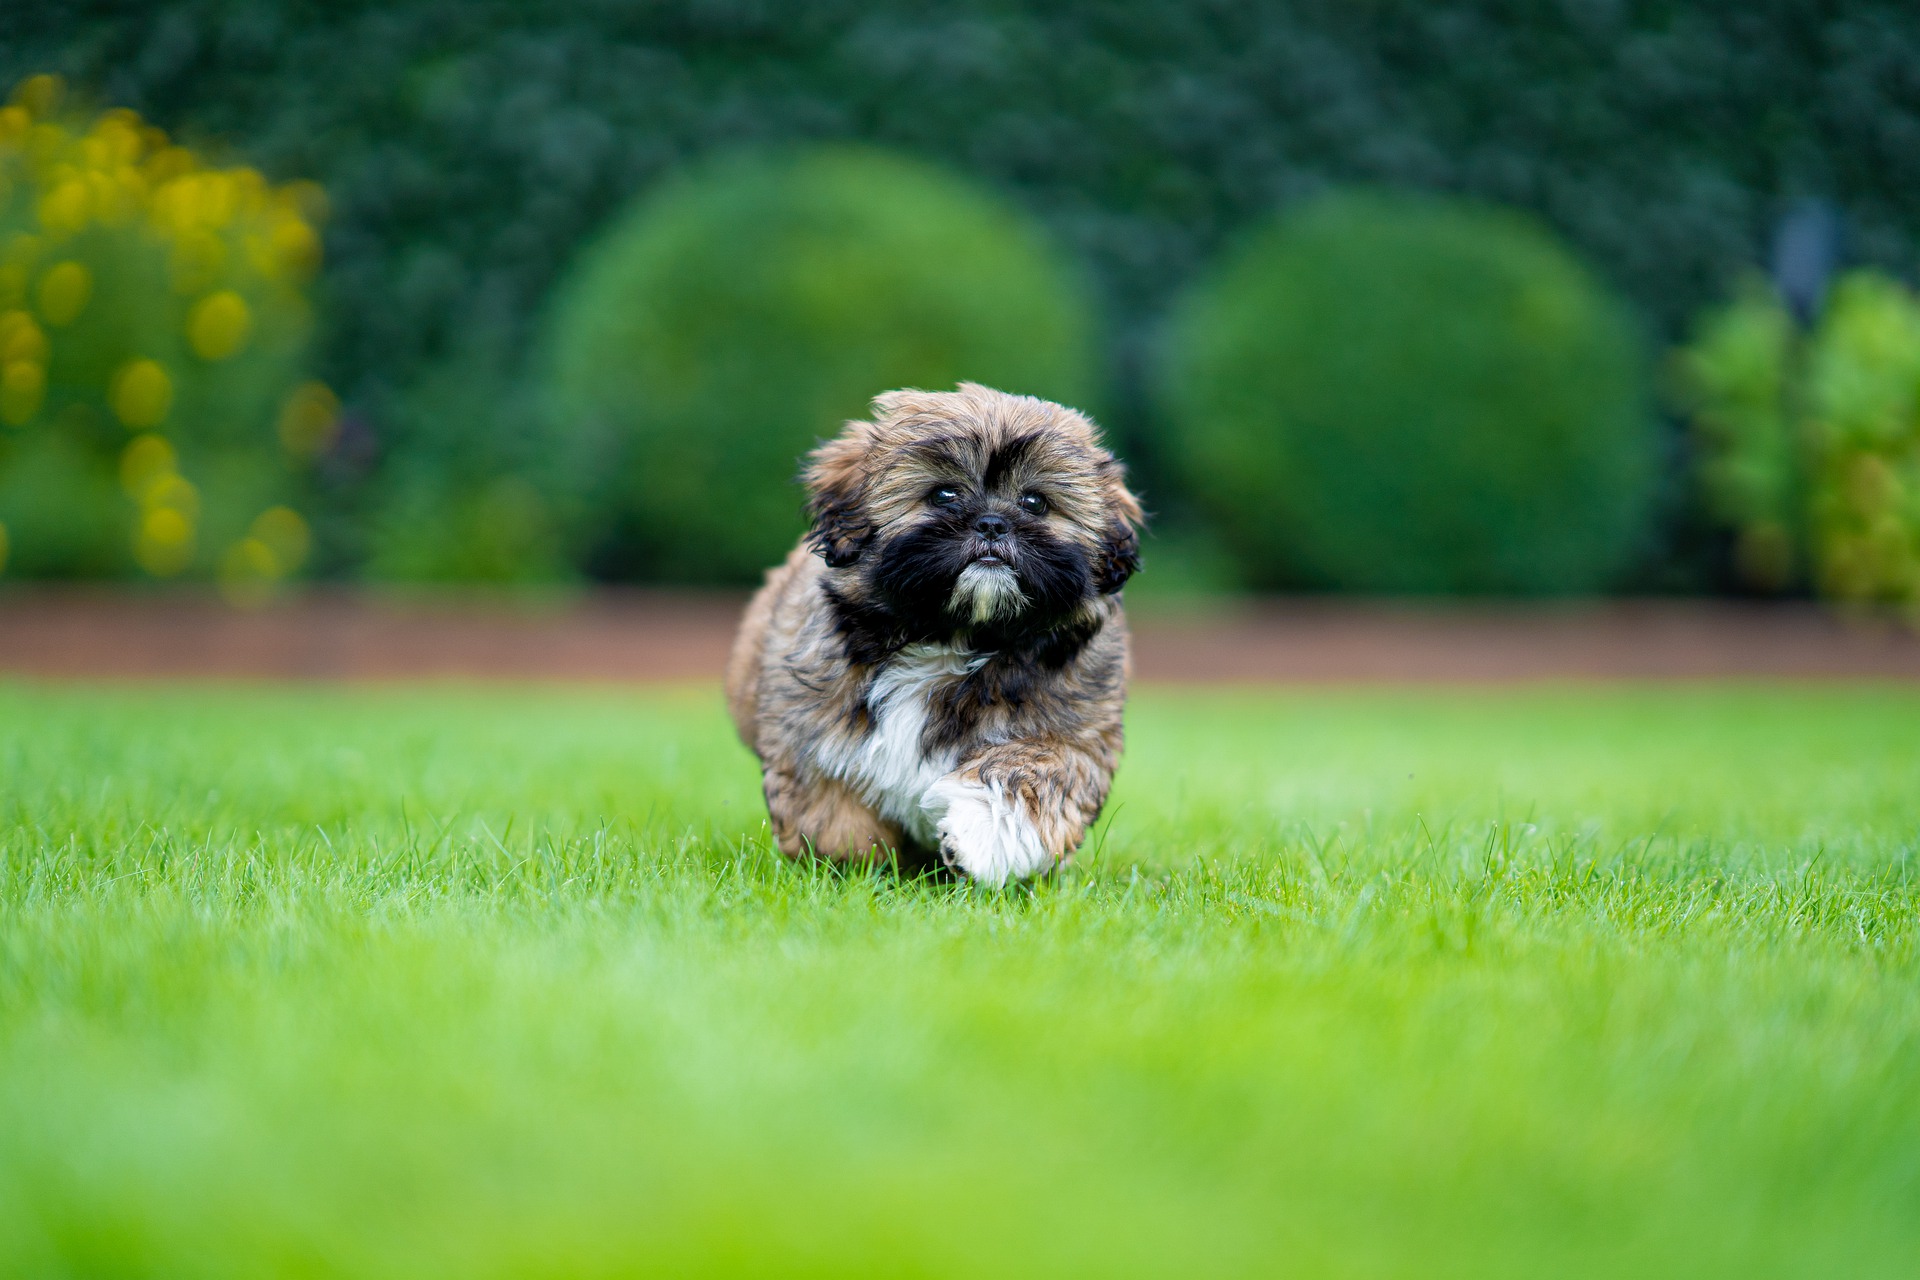 A Shih Tzu named Brody, running in the green grass.